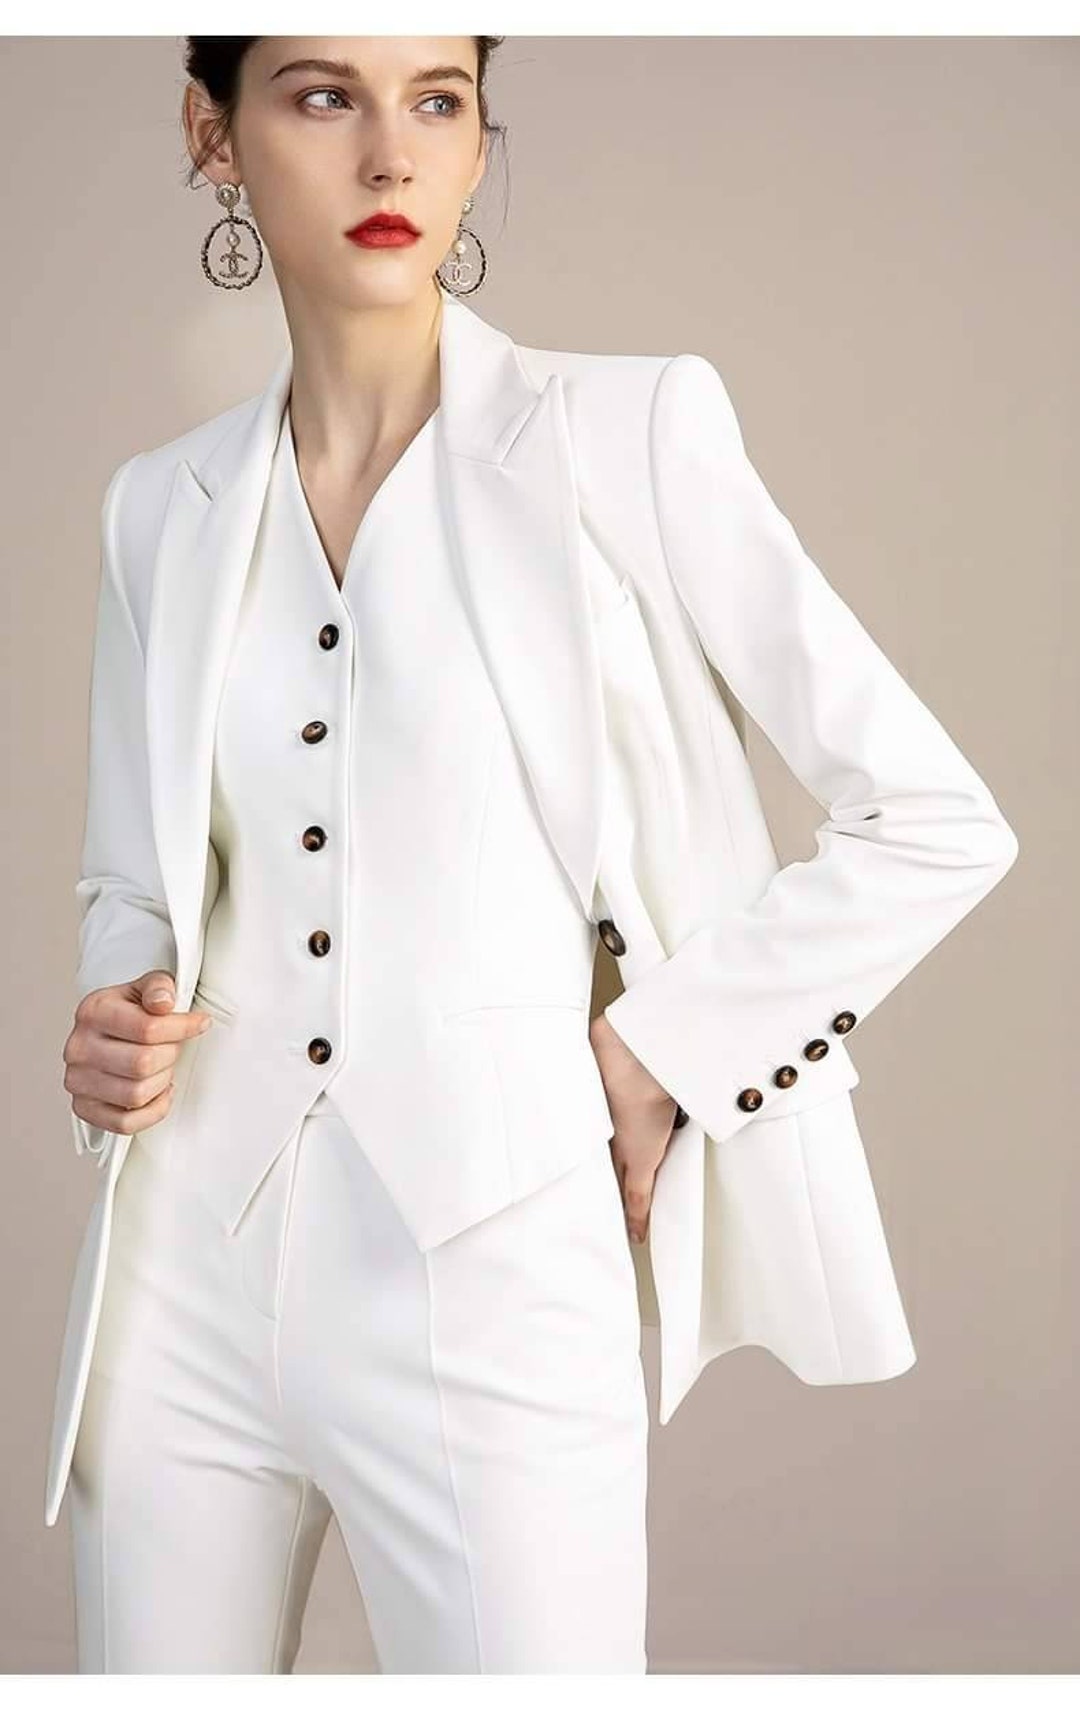 White 3-piece Pants Suits, Formal Suits With Blazer, Waistcoat and Pants,  Wedding Suits, White Pants Suits 